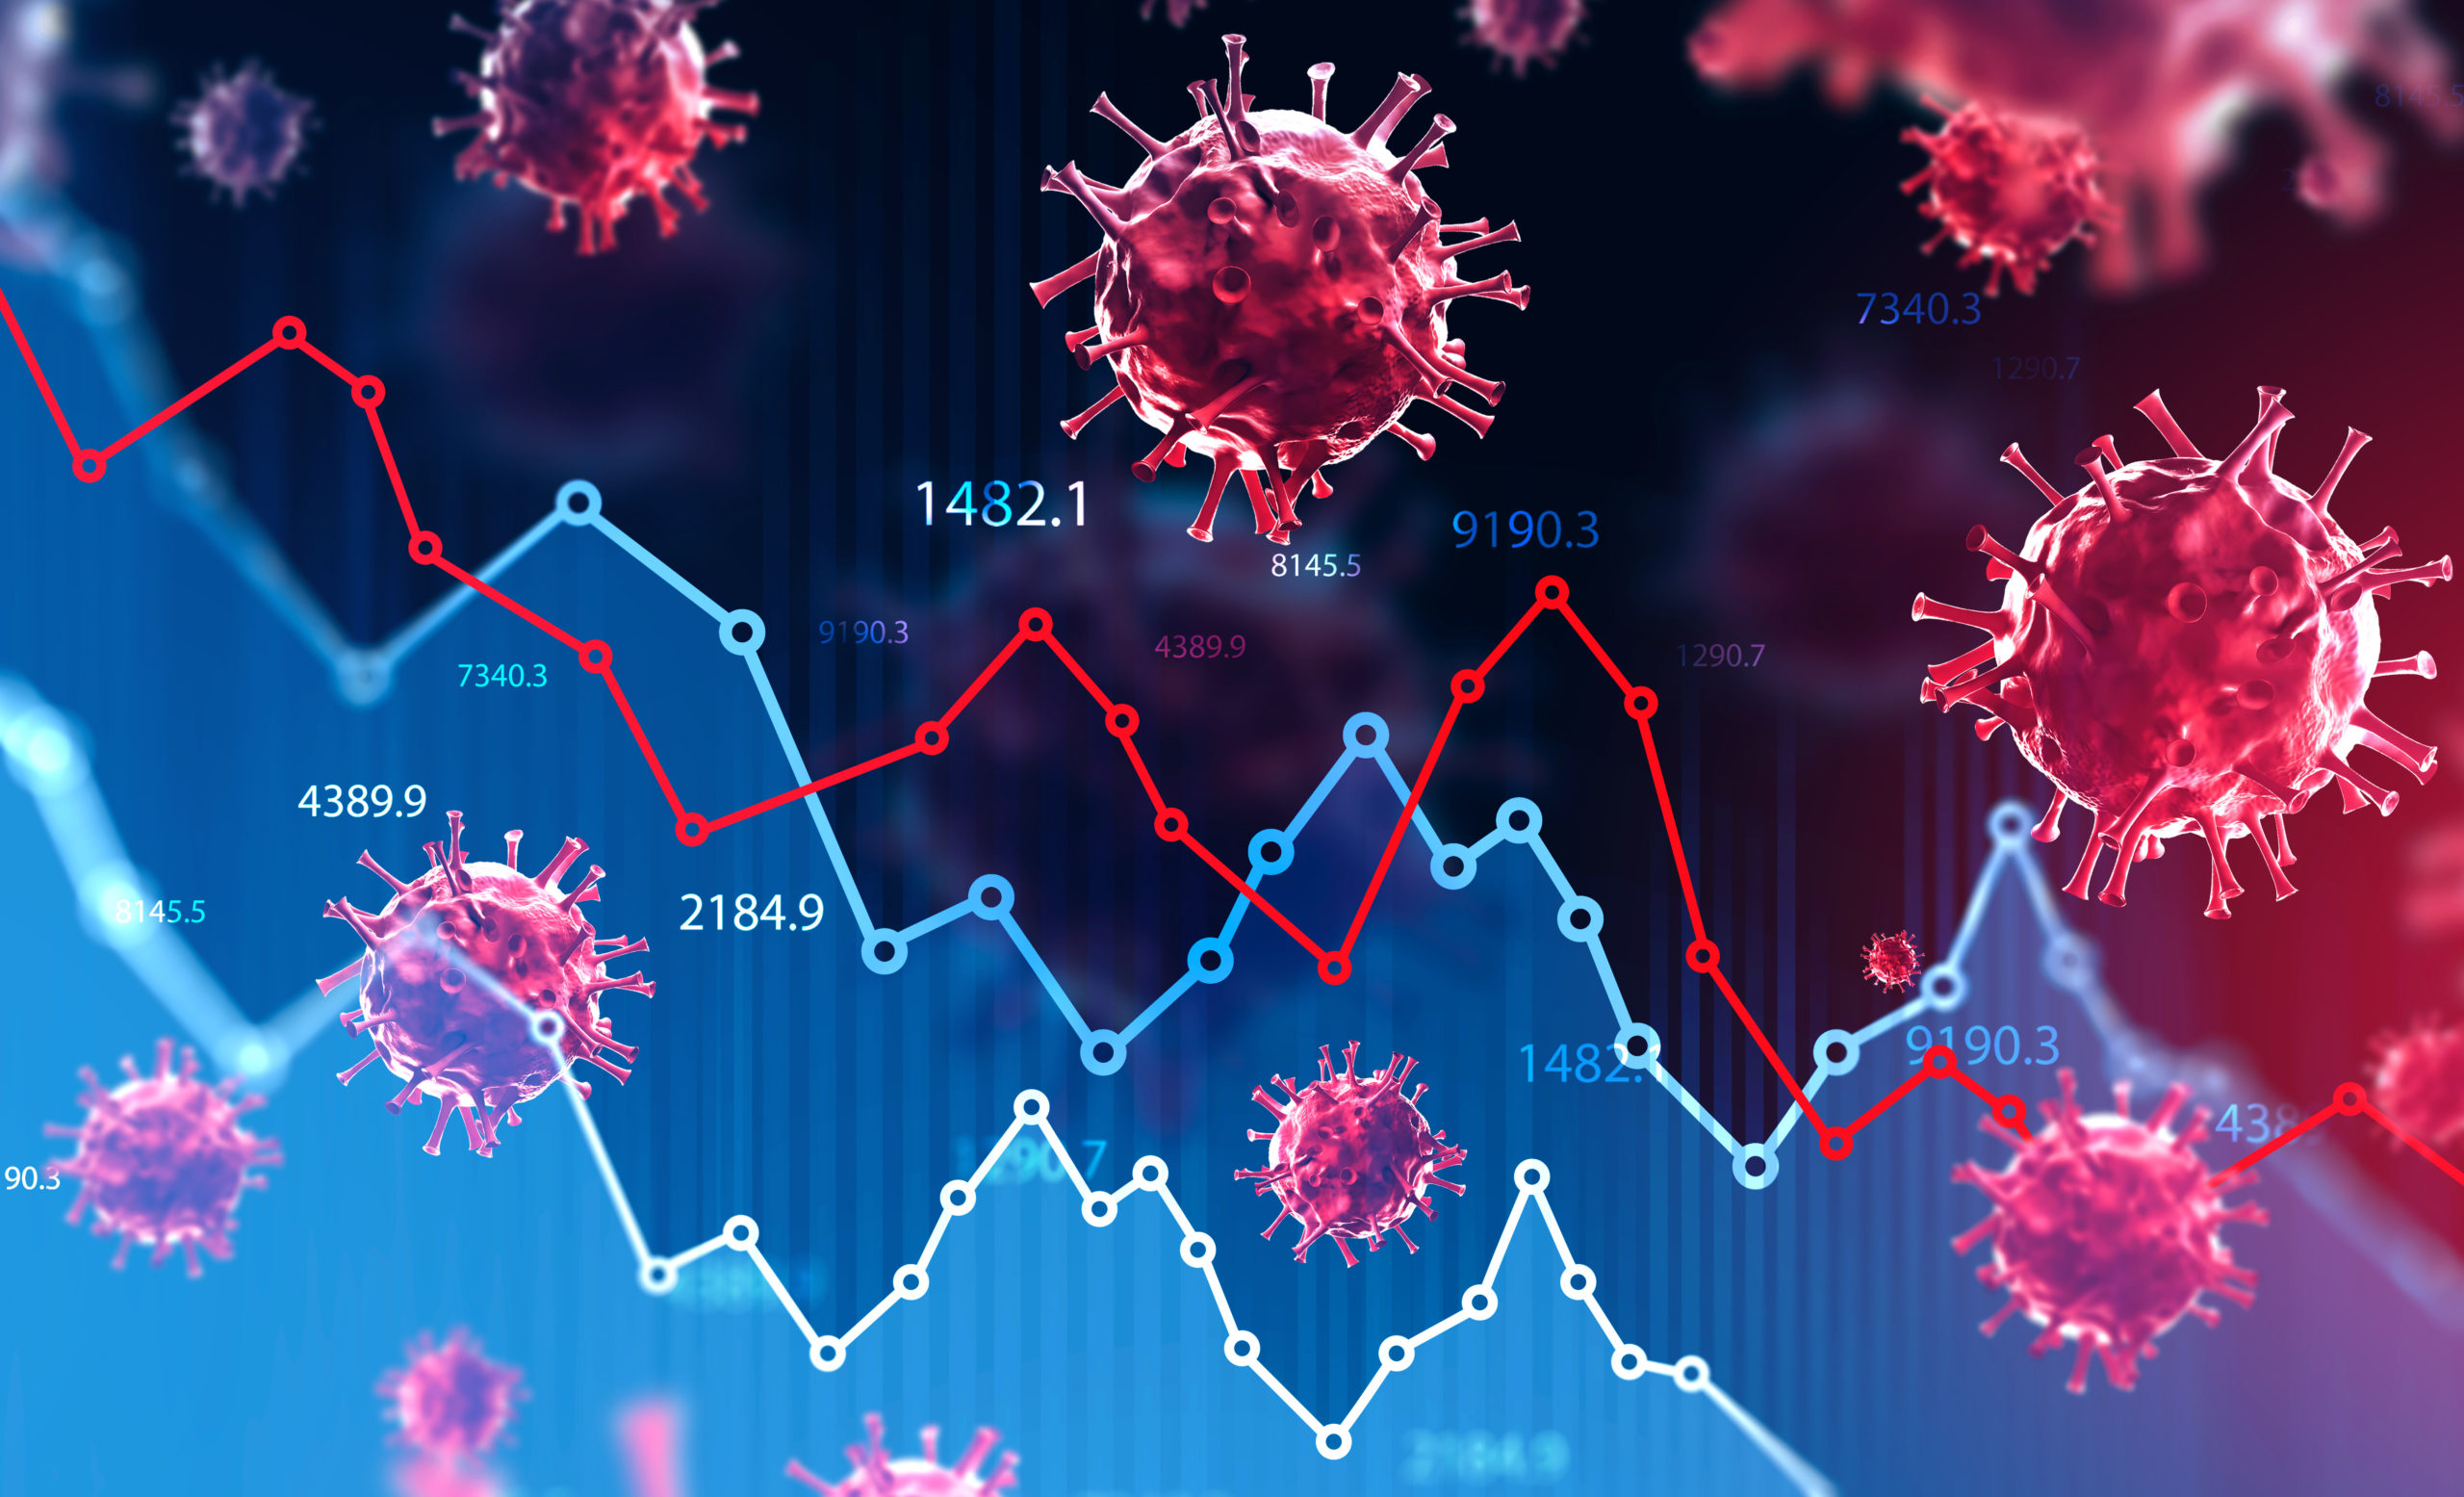 Ncov 2019 covid 19 coronavirus with double exposure of blurry falling financial graphs. Concept of financial crisis due to coronavirus pandemic. 3d rendering